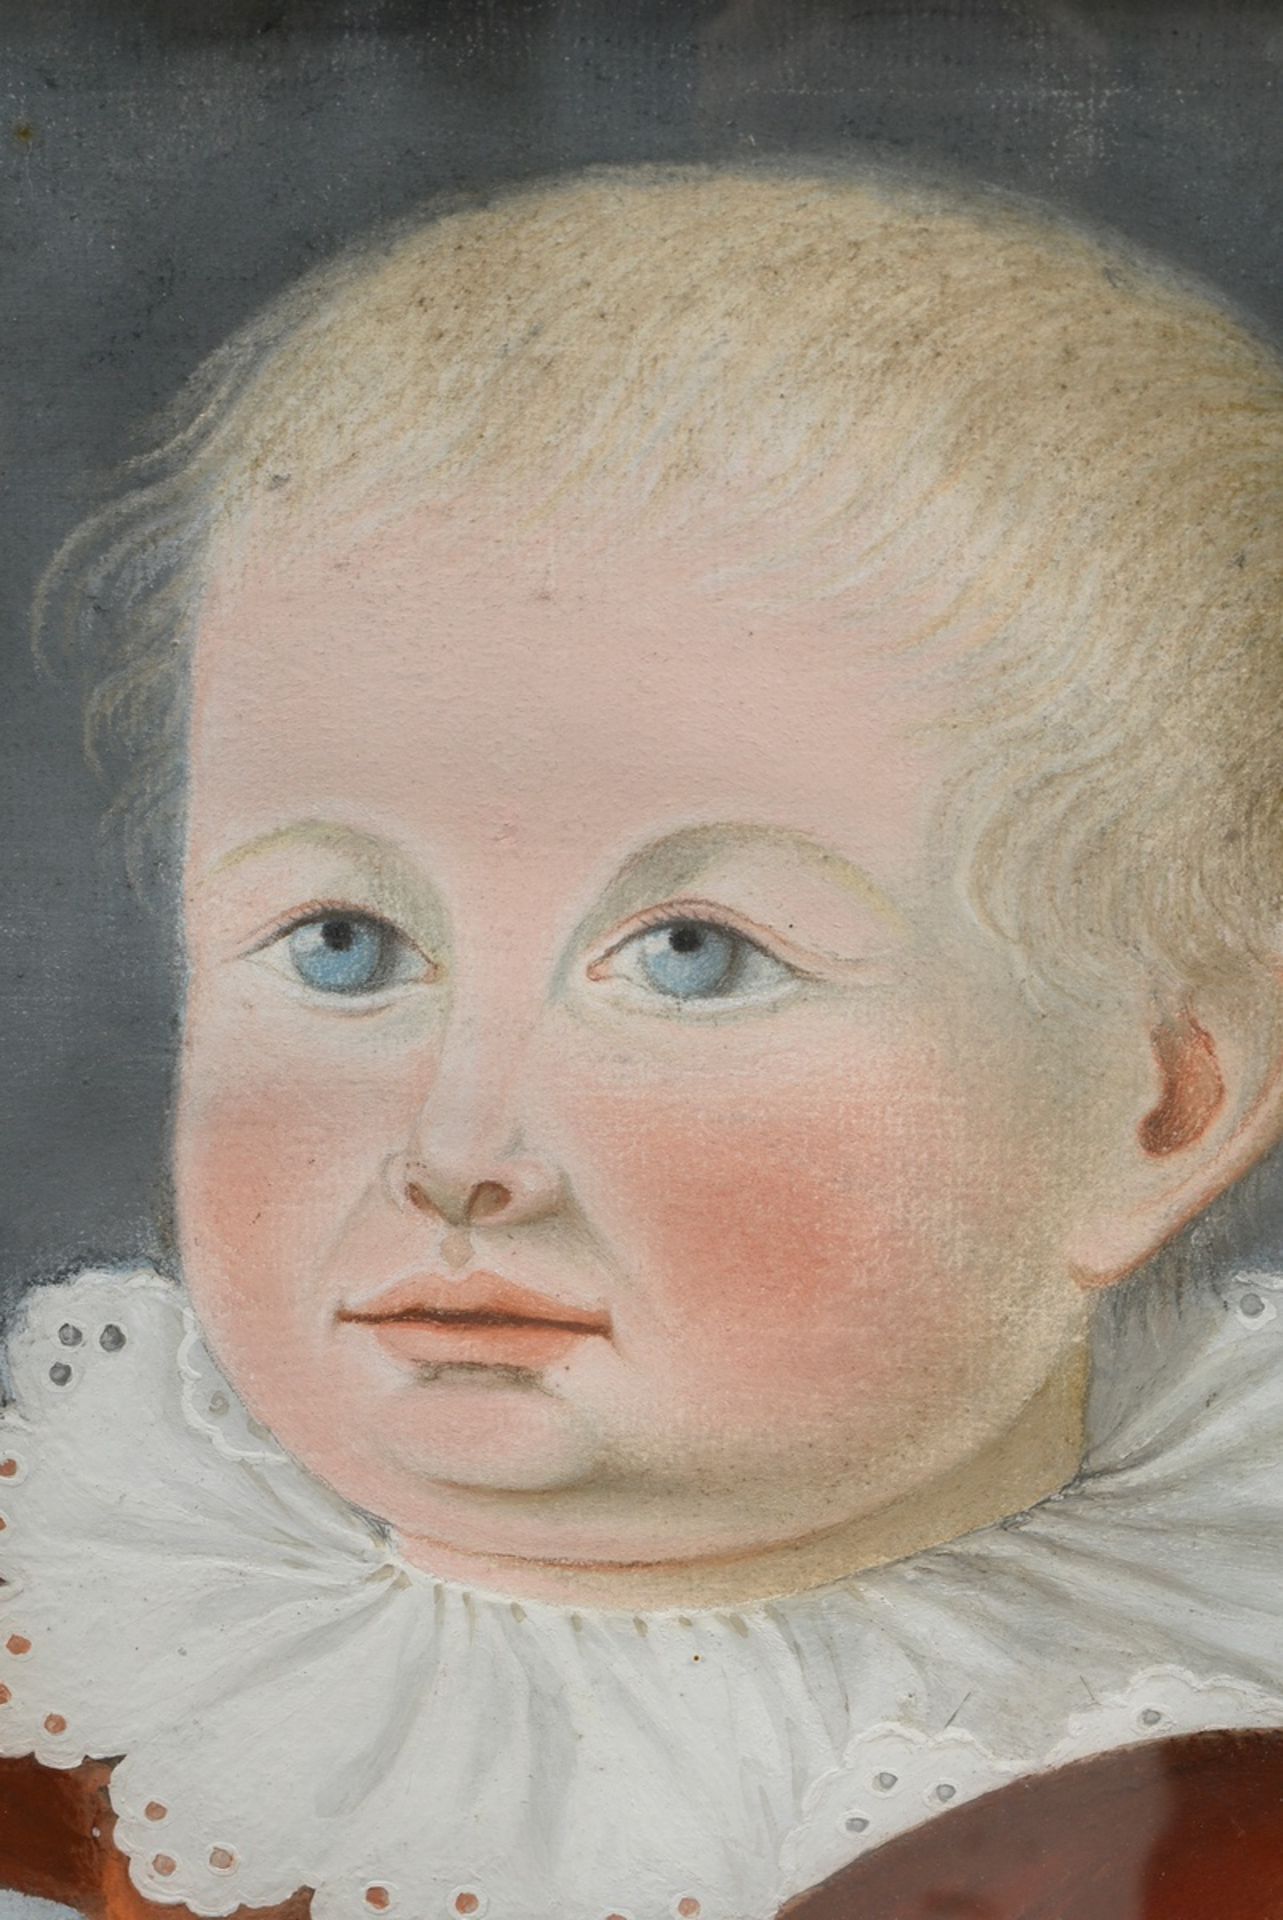 Runge, Philipp Otto (1777-1810) Succession "Infant with a Rose", c. 1805/1810, mixed media, in cont - Image 2 of 3